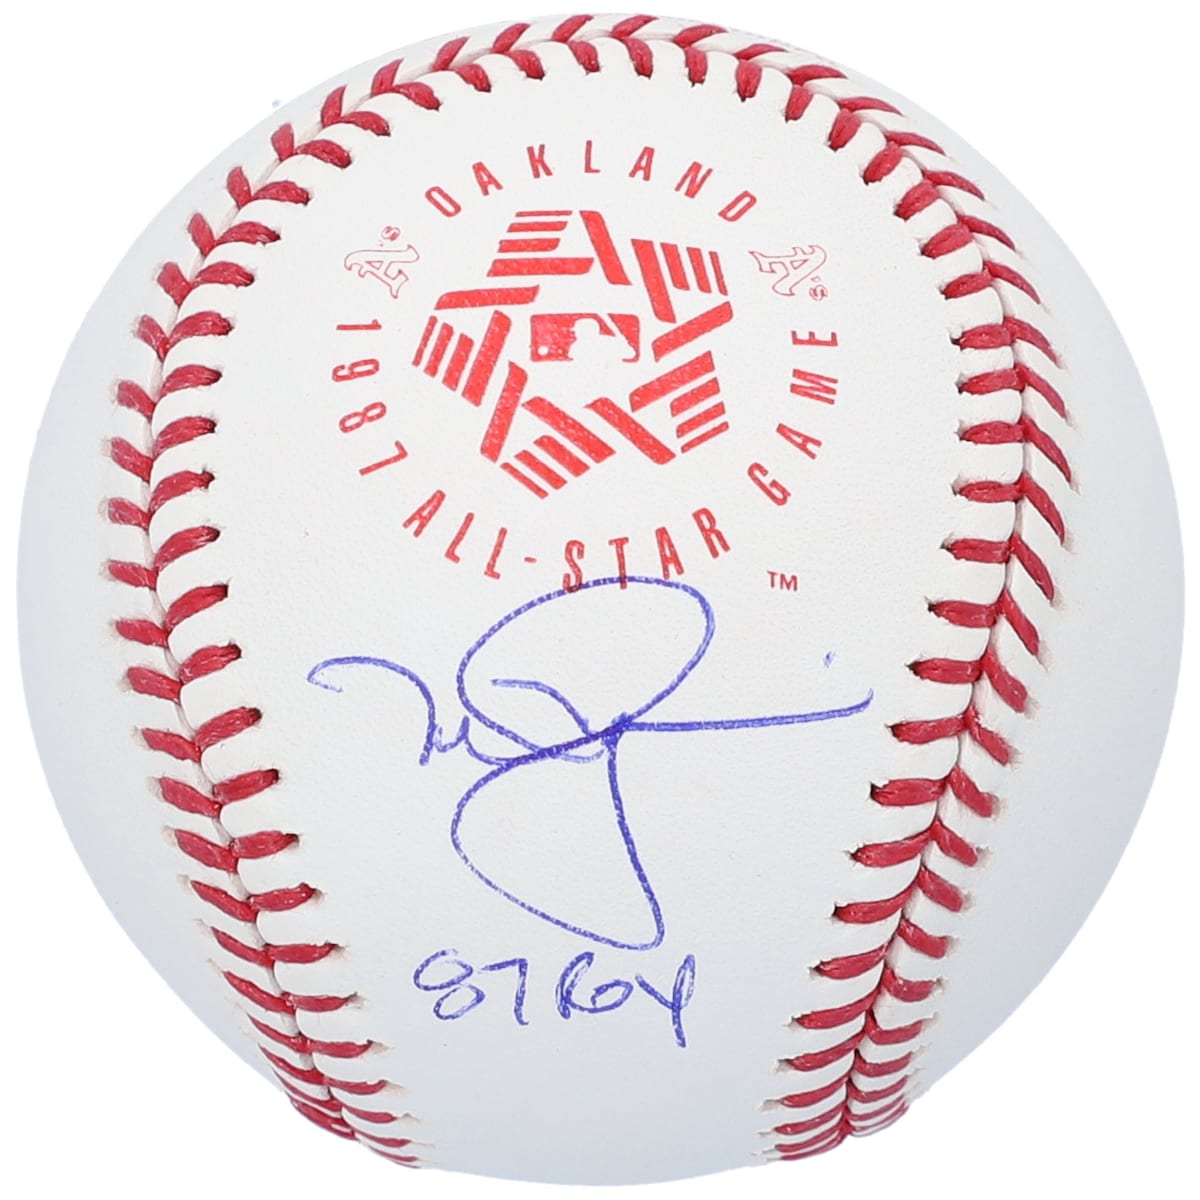 This baseball has been personally hand-signed by Mark McGwire with the inscription "87 ROY." It has been obtained under the auspices of the Major League Baseball Authentication Program and can be verified by its numbered hologram at MLB.com. It also comes with an individual numbered, tamper-evident hologram from Fanatics Authentic. This process helps to ensure that the product purchased is authentic and eliminates any possibility of duplication or fraud.Signature may varyAutographed baseballOfficially licensedBrand: Fanatics AuthenticIncludes an individually numbered tamper-evident hologram